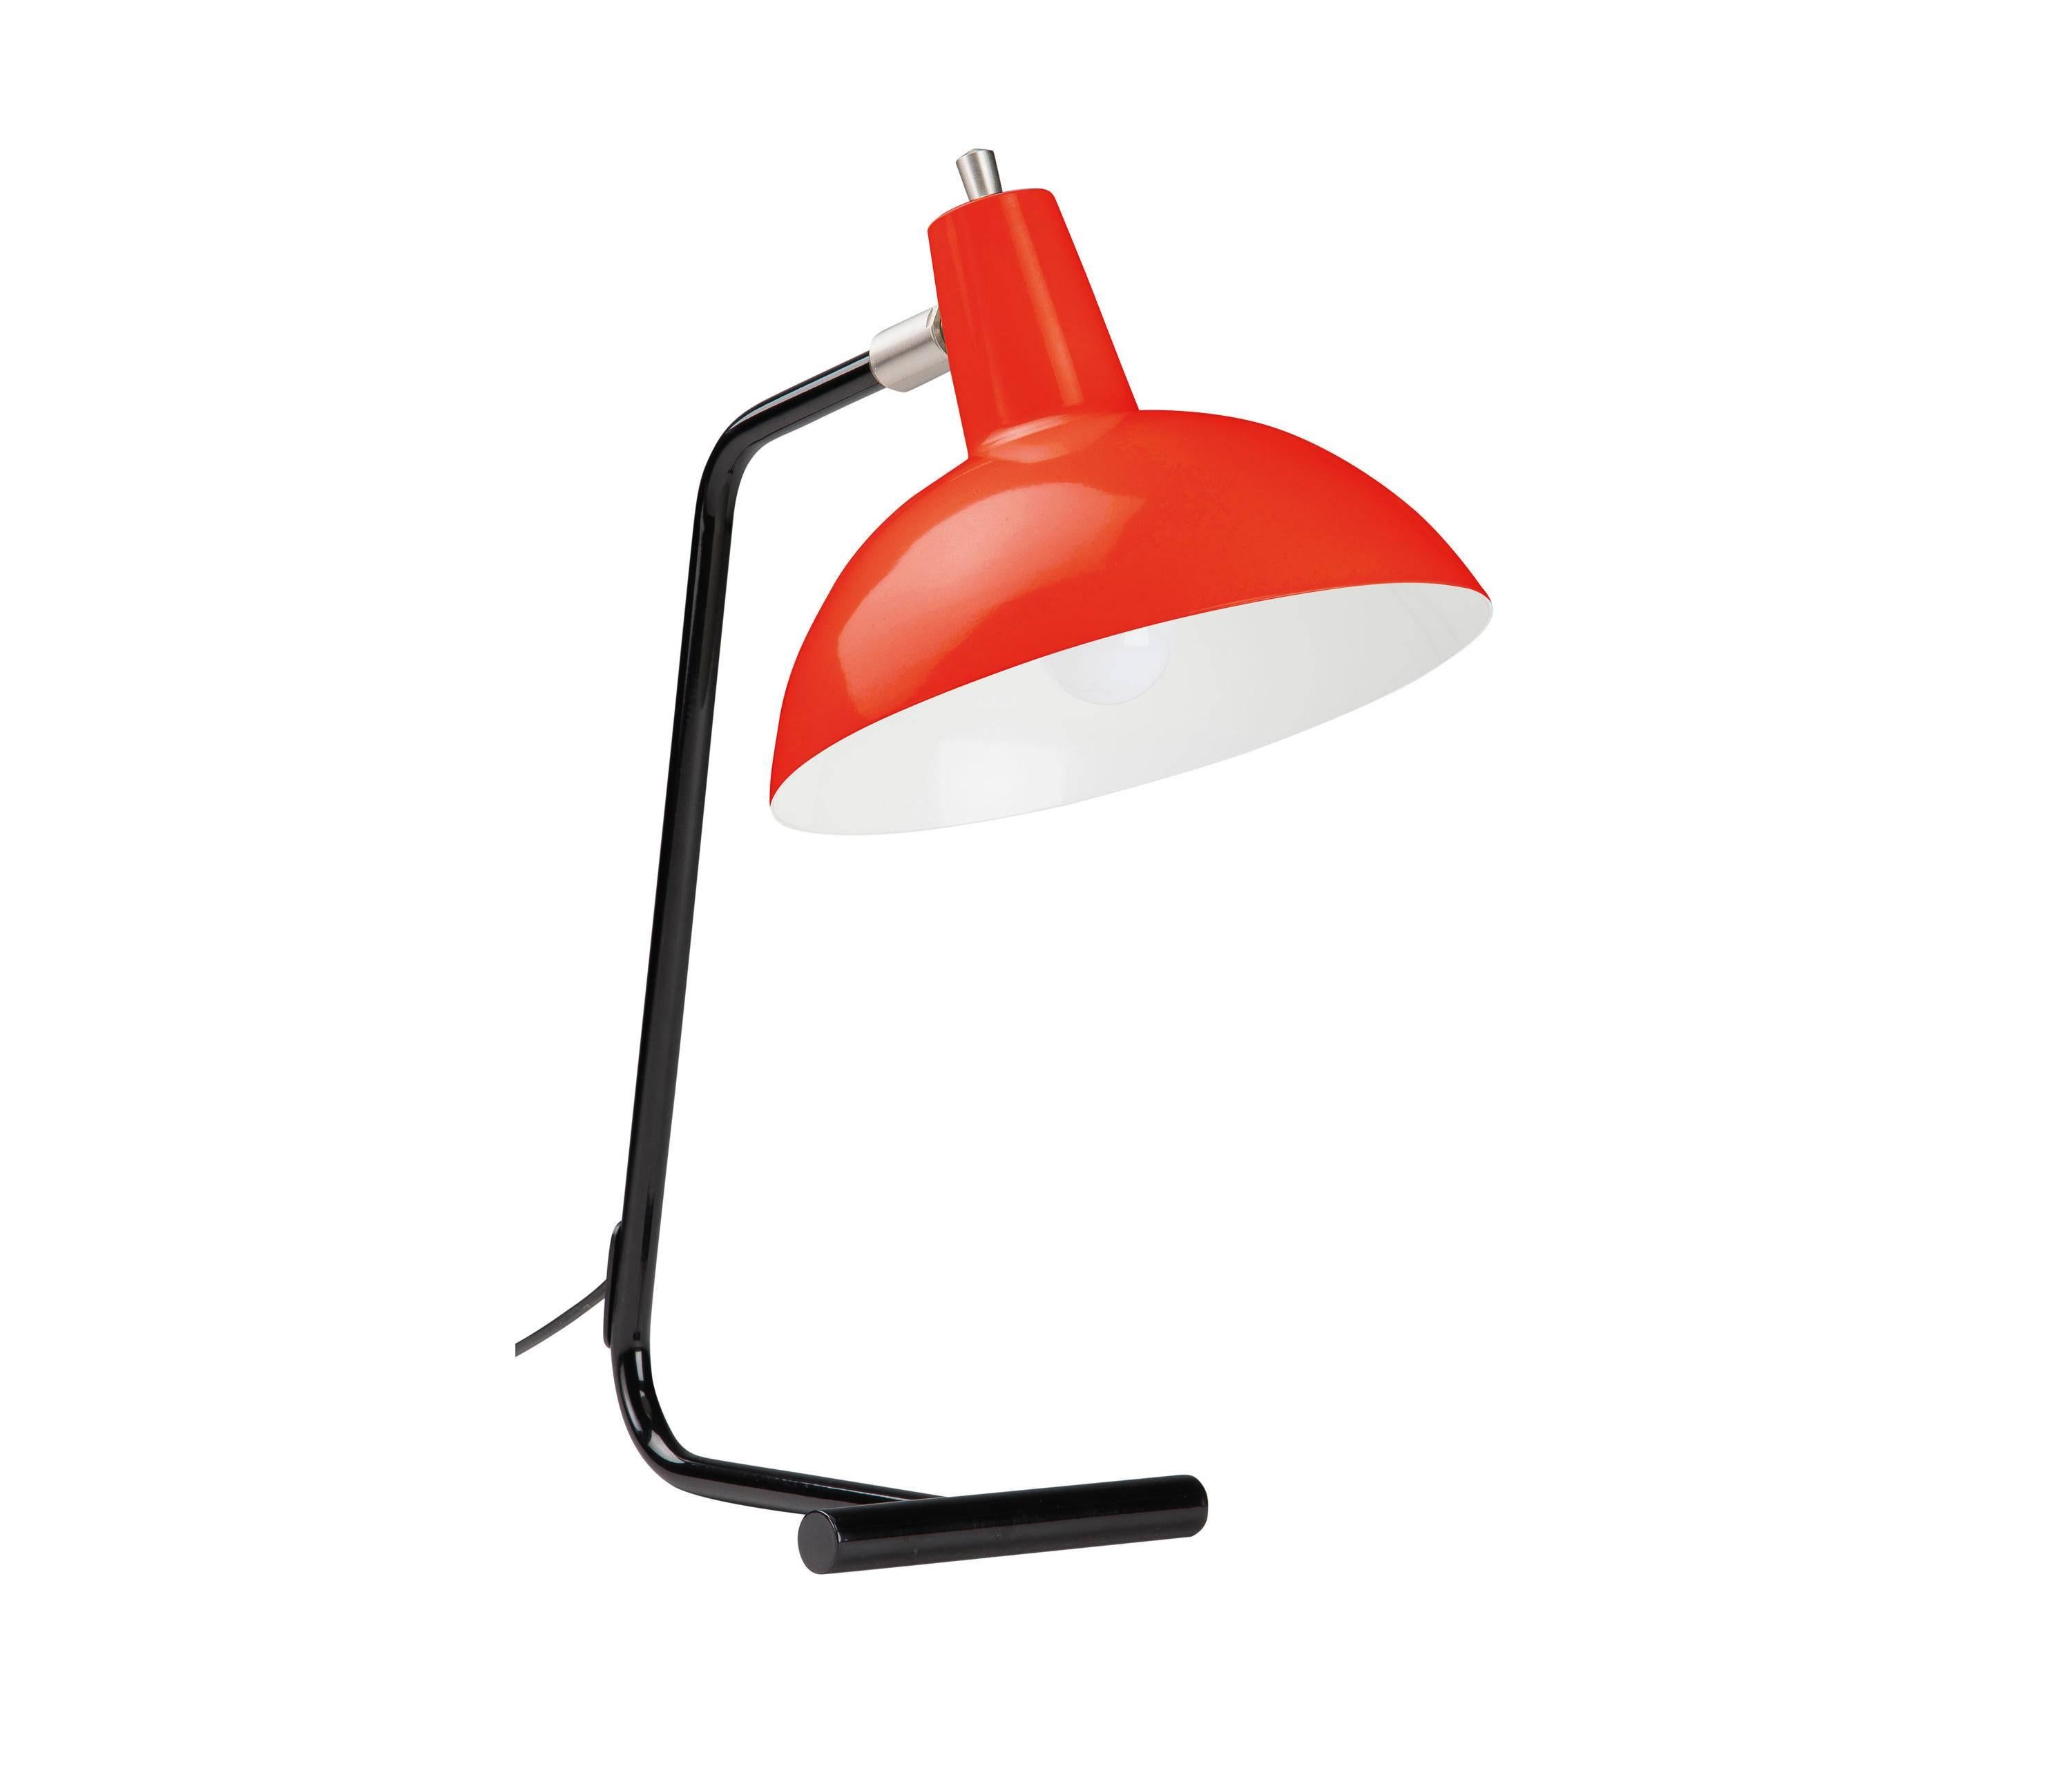 J.J.M. Hoogervorst Red 'Director' Table Light for Anvia. Executed in painted aluminium and steel, with adjustable shade. Based on the original and rare type 6019 table lamp from the 1960s. 'The Director' was named in homage to the original founder